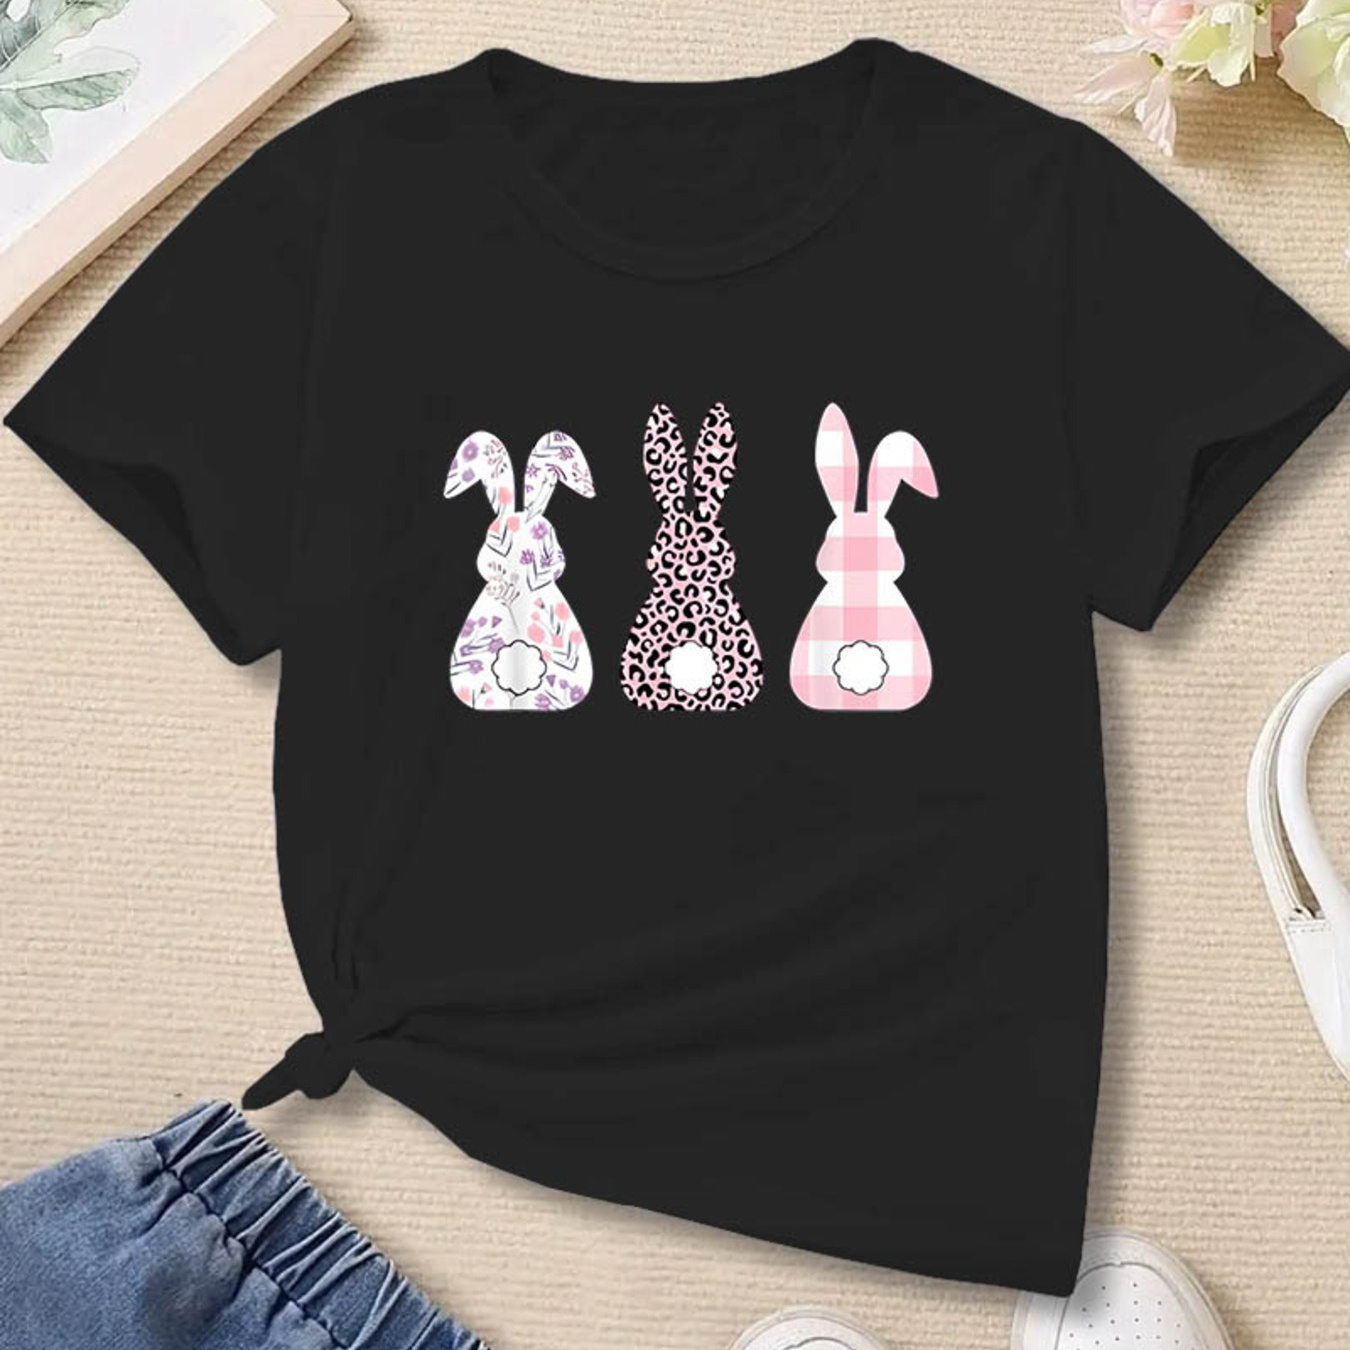 

Cartoon Bunnies Graphic Print For Girls, Comfy And Fit T-shirt Top Pullover For Spring And Summer For Outdoor Activities